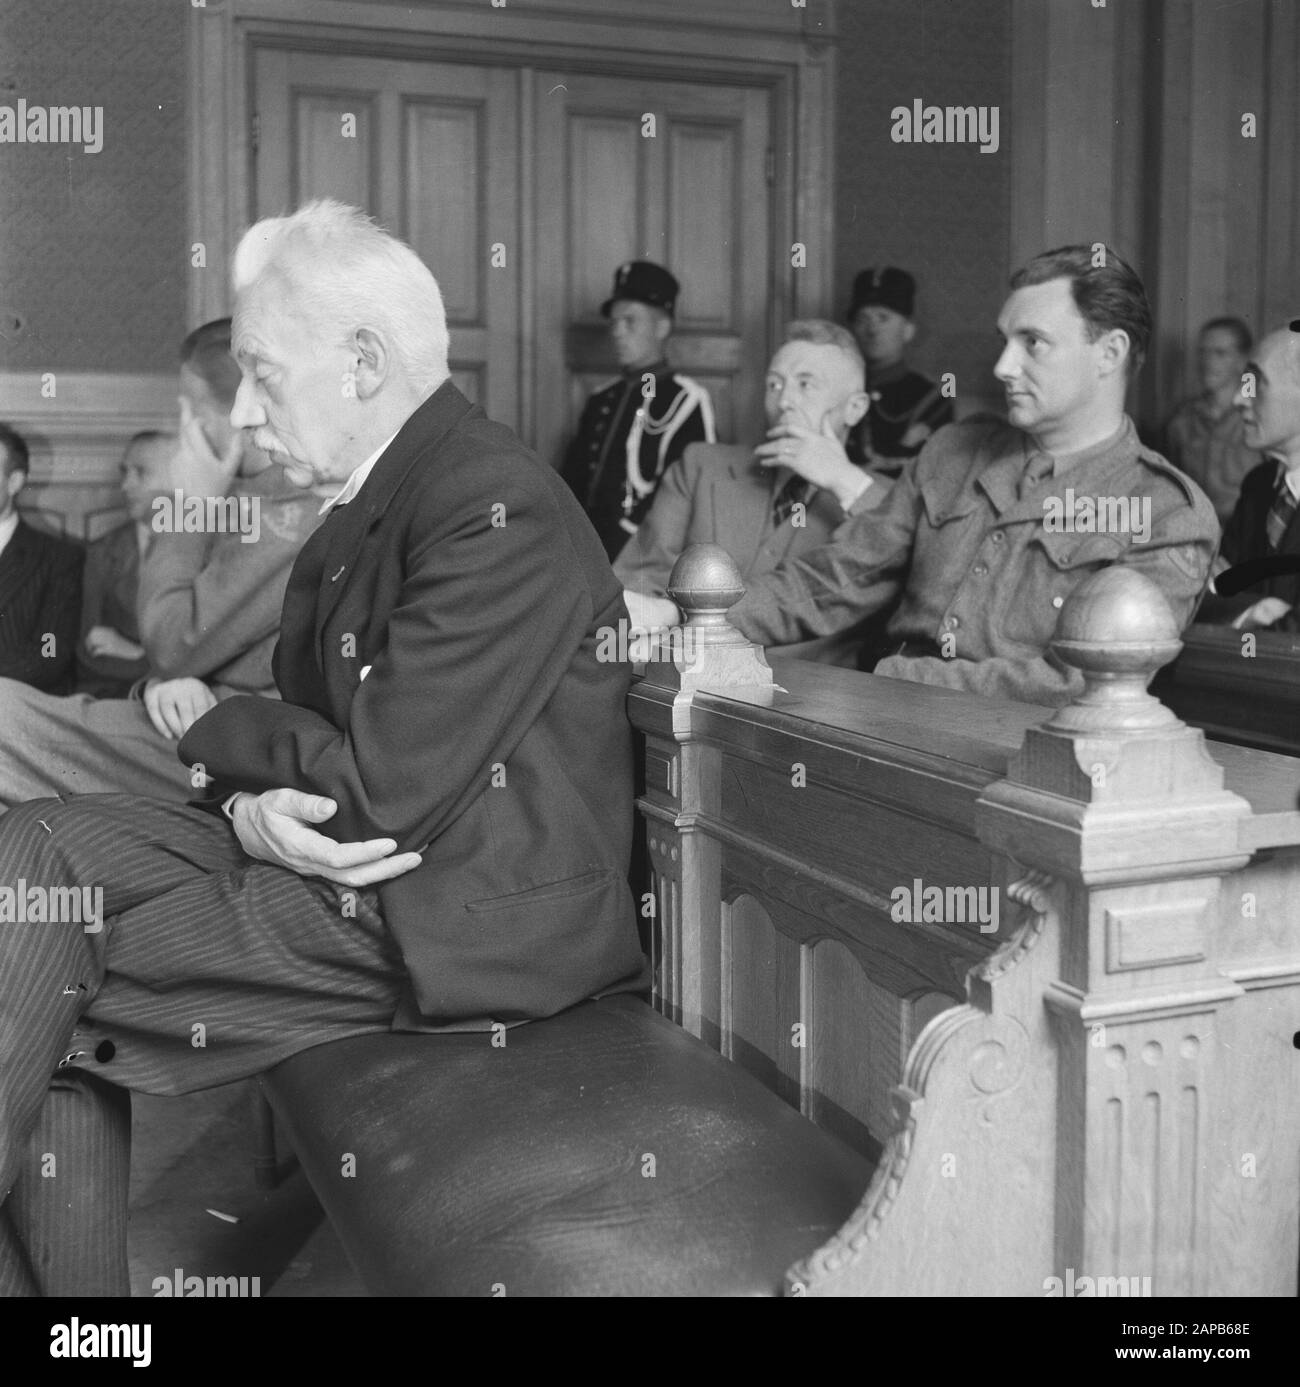 First session of the Tribunal Special Judiciary in Den Bosch Description: The accused Date: 25 July 1945 Location: Den Bosch Keywords: justice, World War II, purification Stock Photo